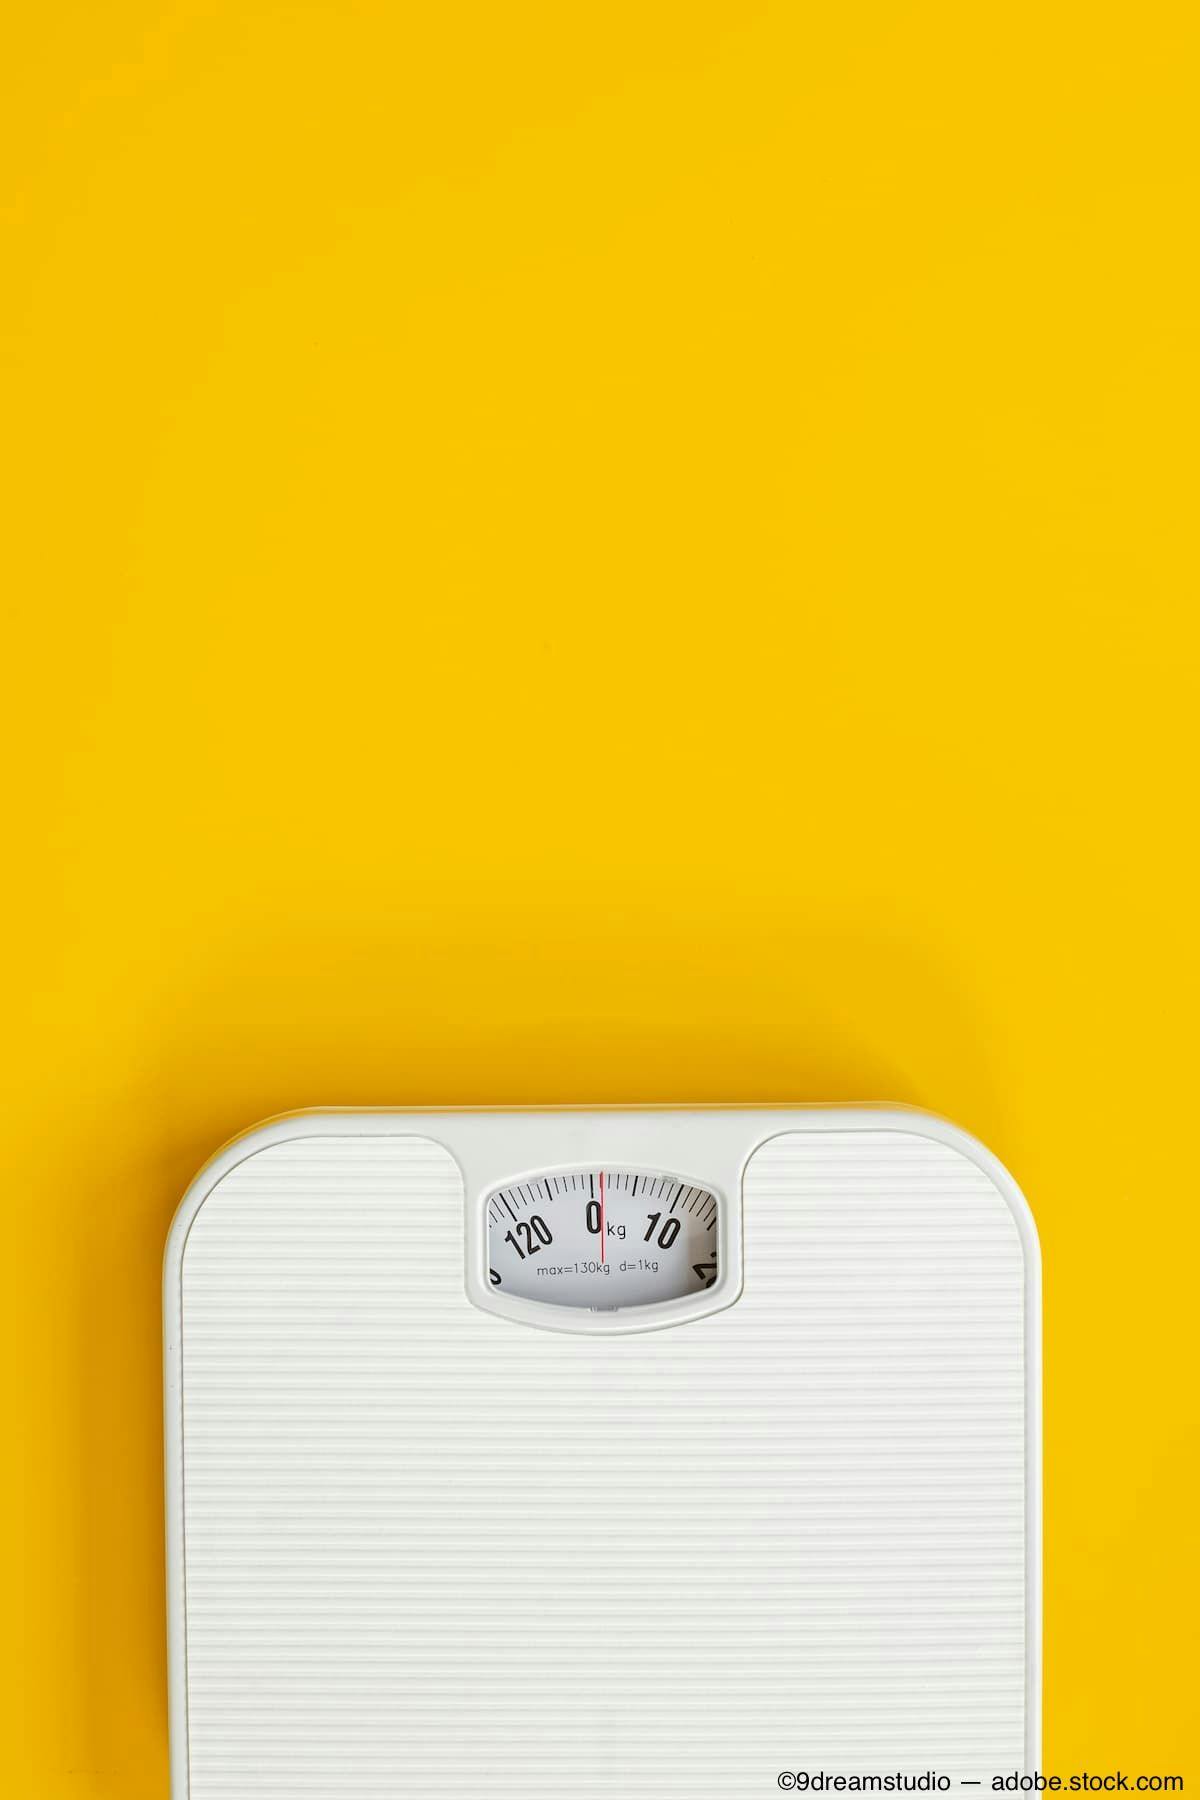 Weight scale on yellow backdrop ©9dreamstudio - adobe.stock.com